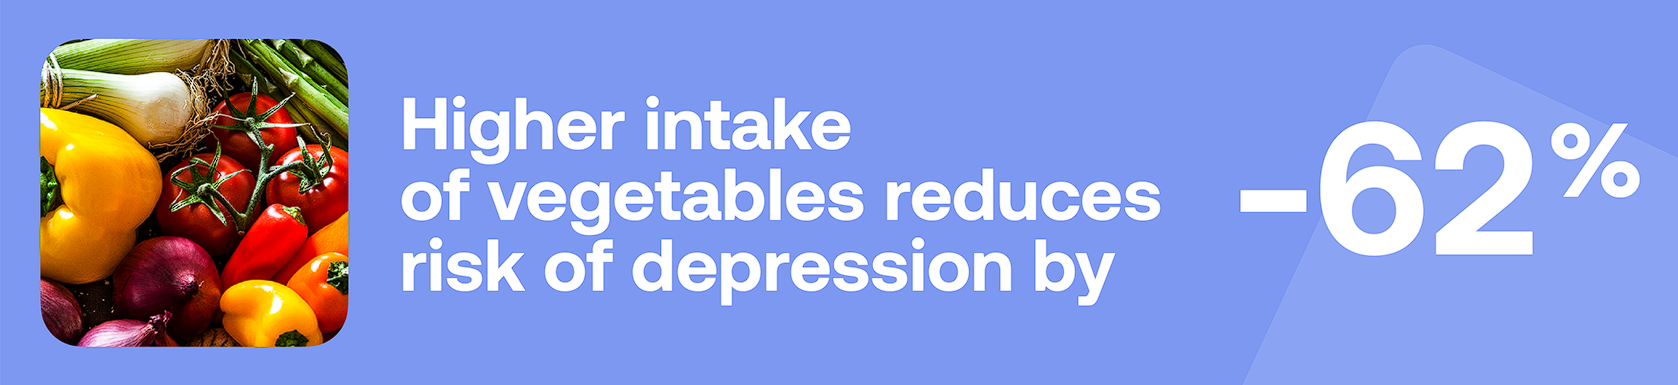 Higher intake of vegetables reduces risk of depression by -62%